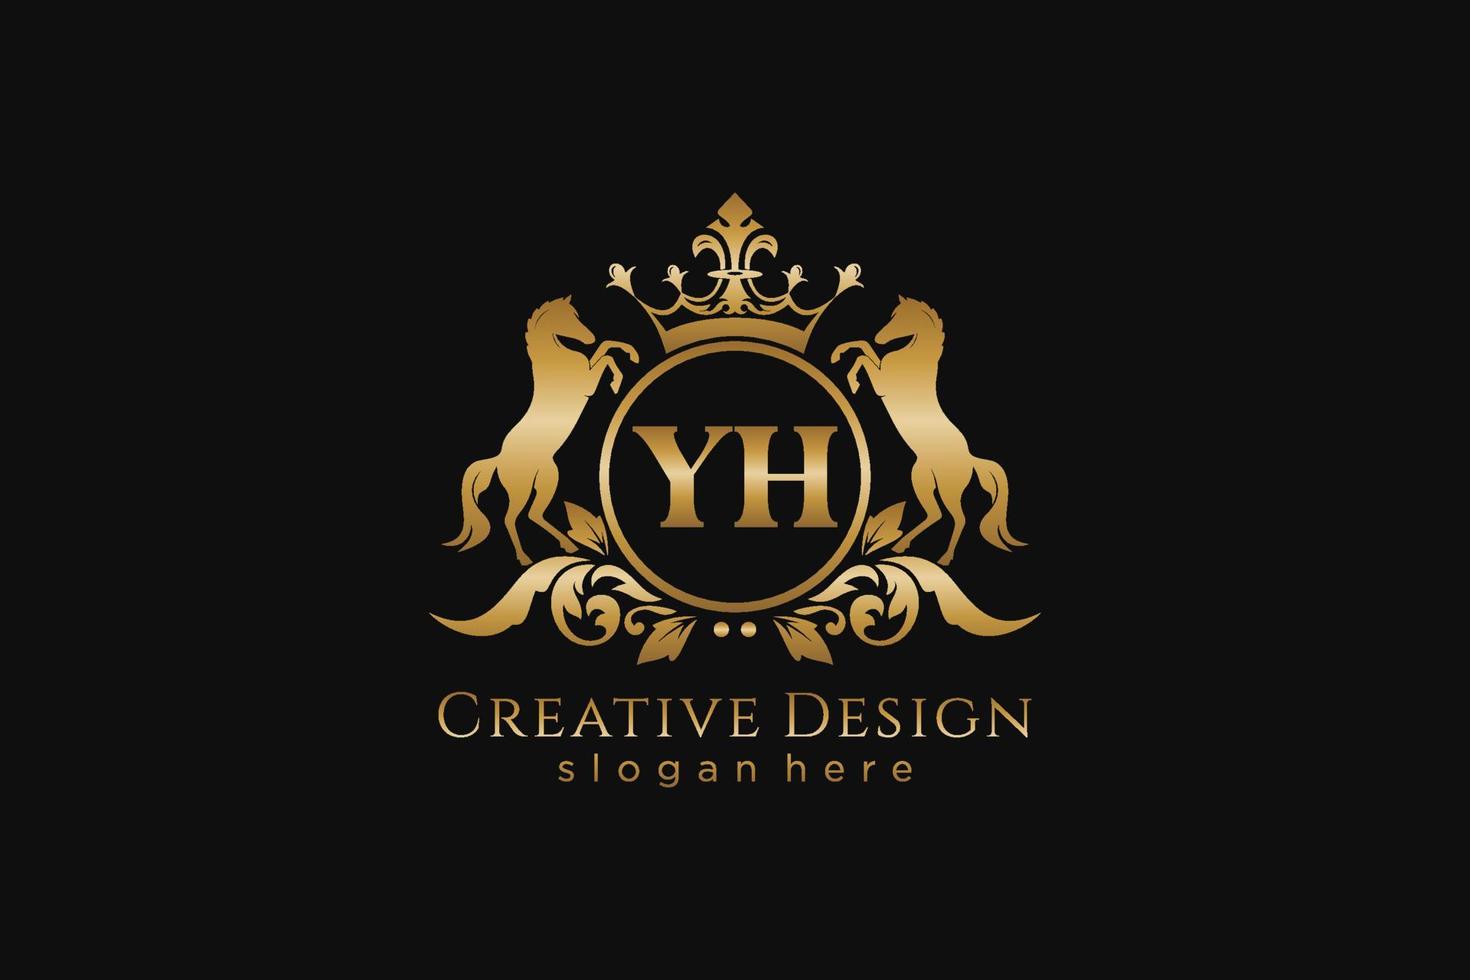 initial YH Retro golden crest with circle and two horses, badge template with scrolls and royal crown - perfect for luxurious branding projects vector